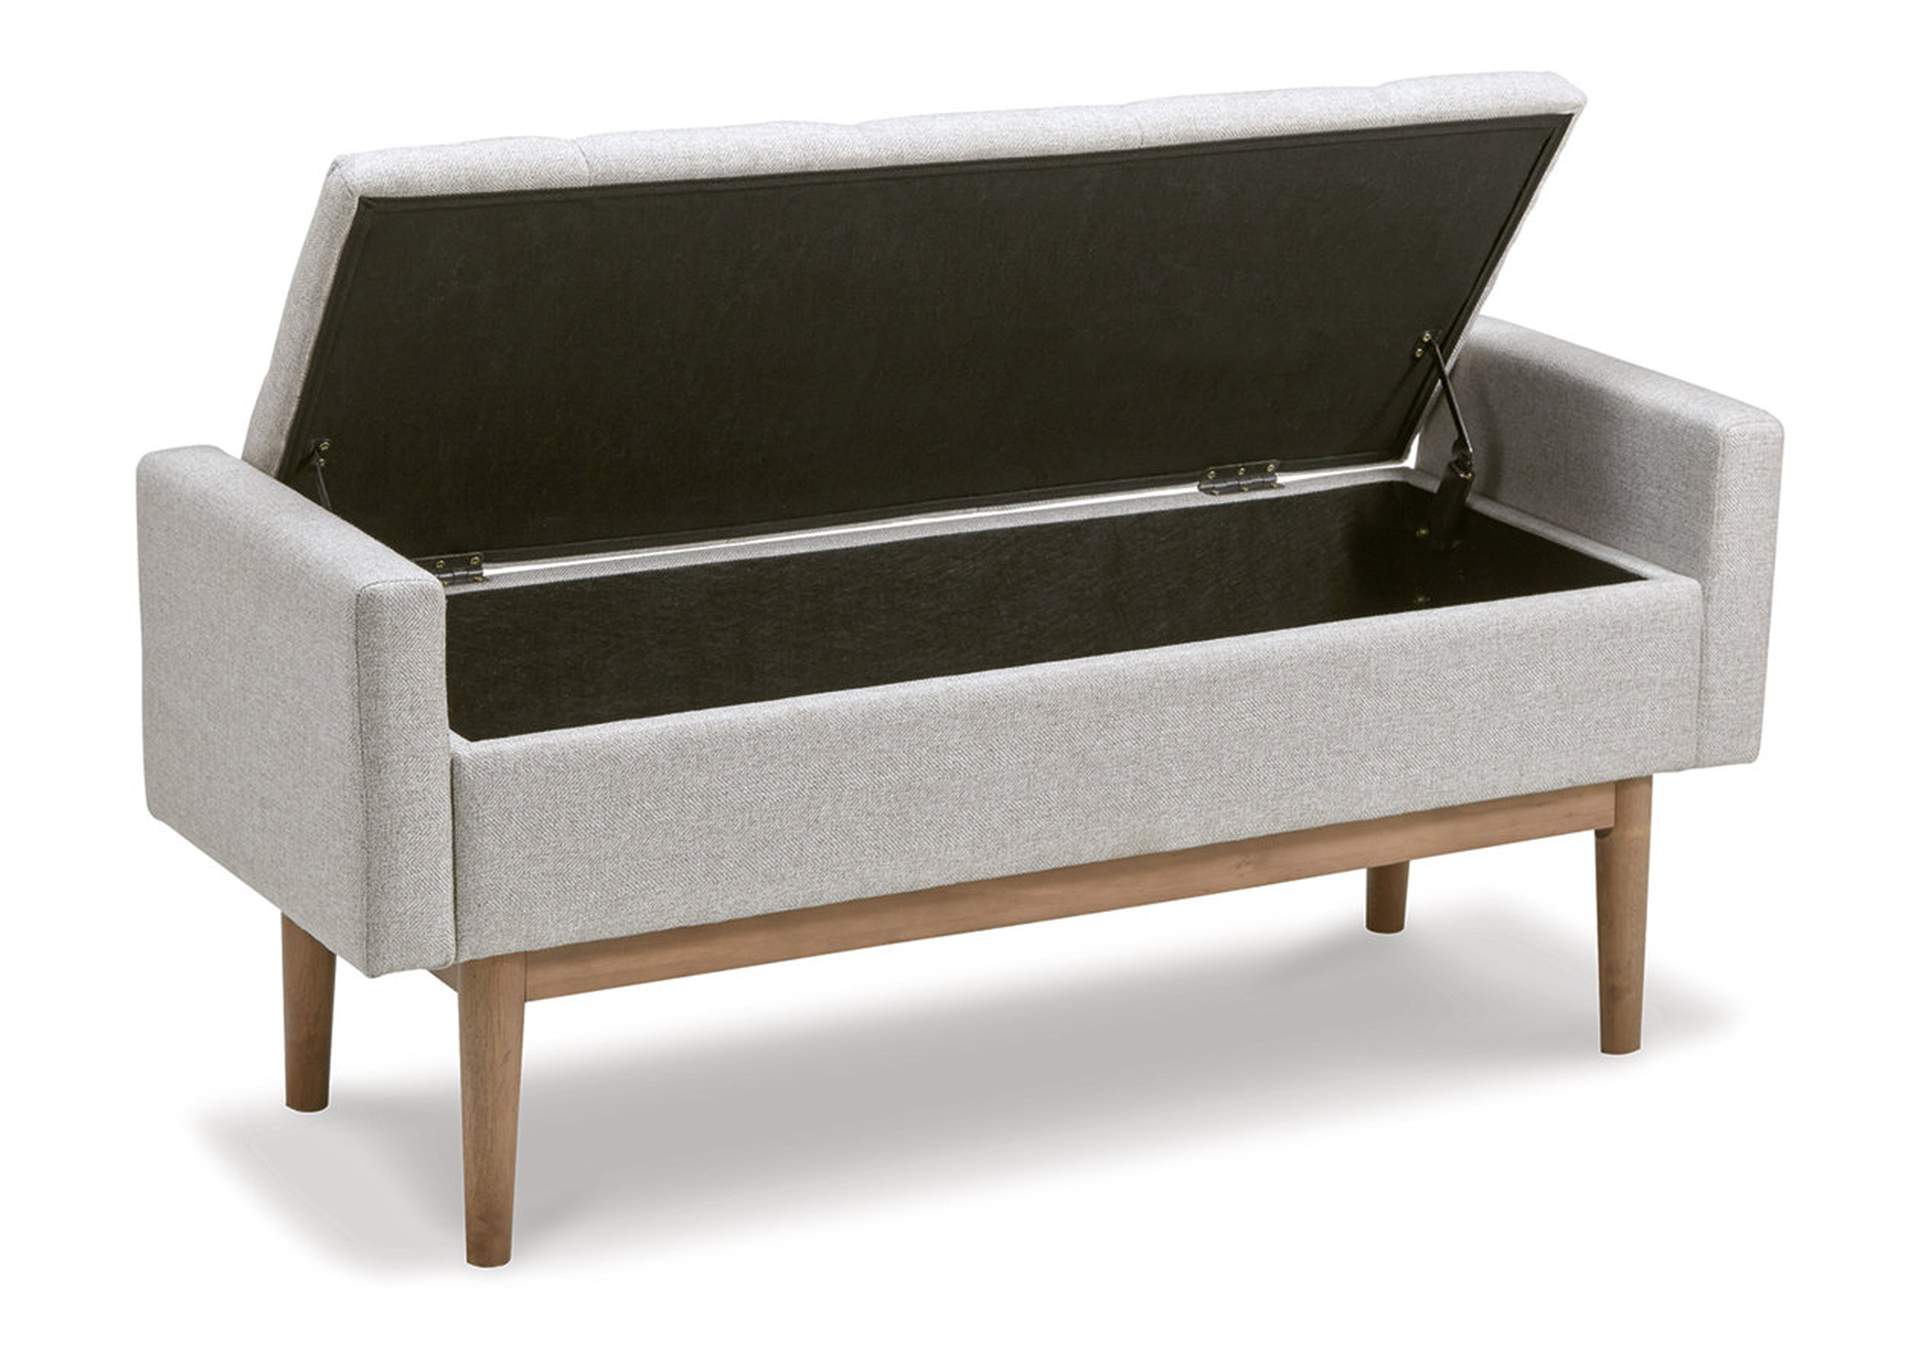 Briarson Storage Bench,Direct To Consumer Express